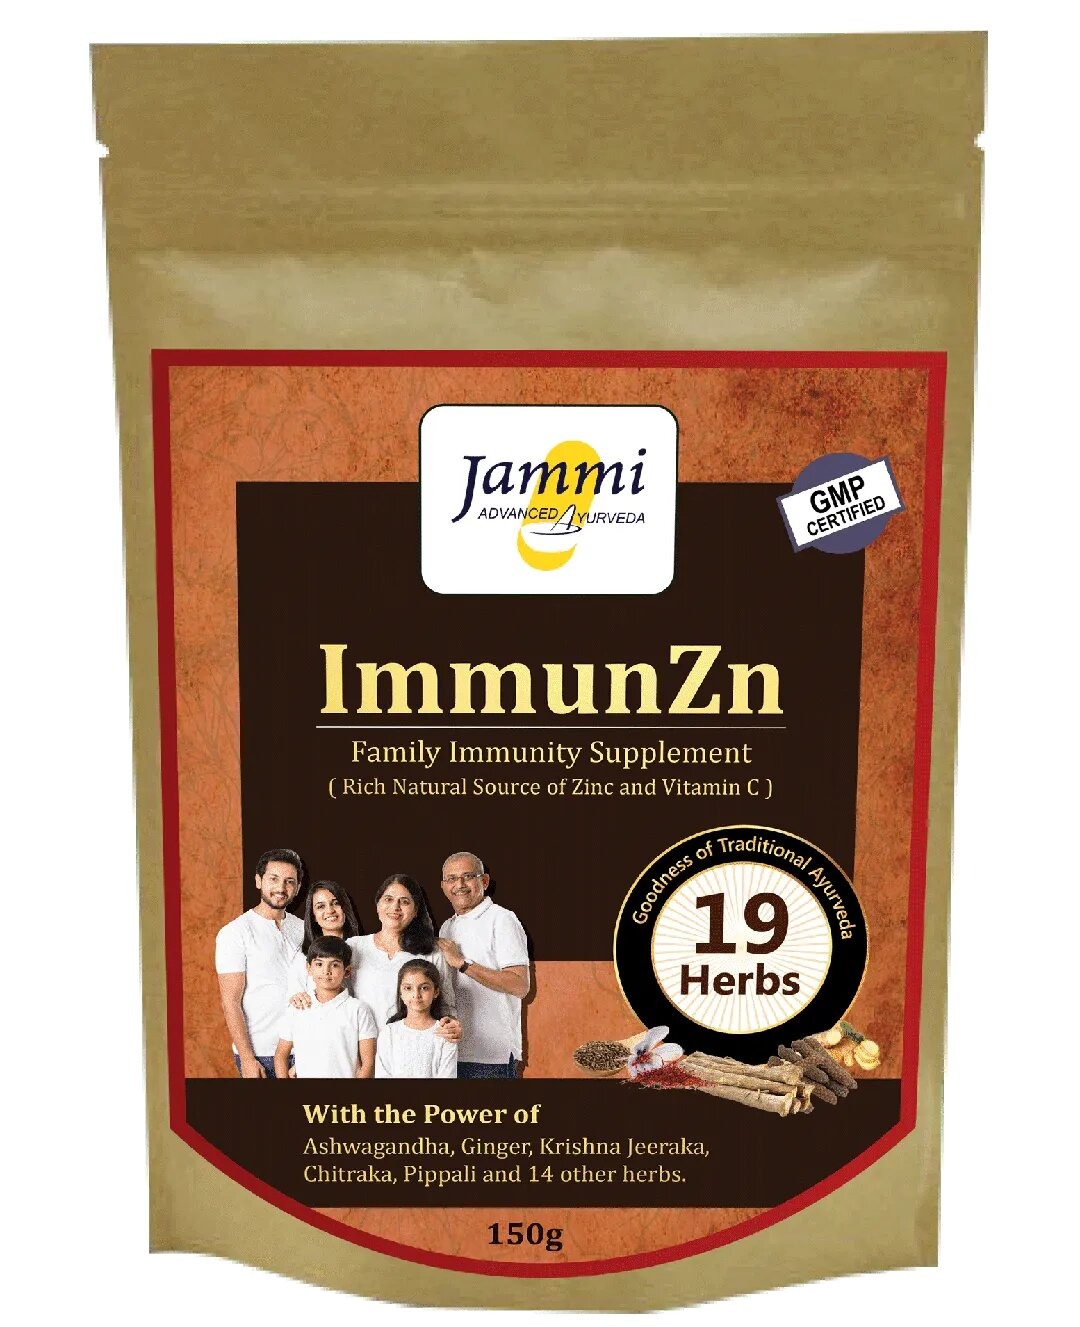 ImmunZn – Immunity Booster, 150g NO SIDE EFFECT Immunity Booster for the Entire Family - with natura